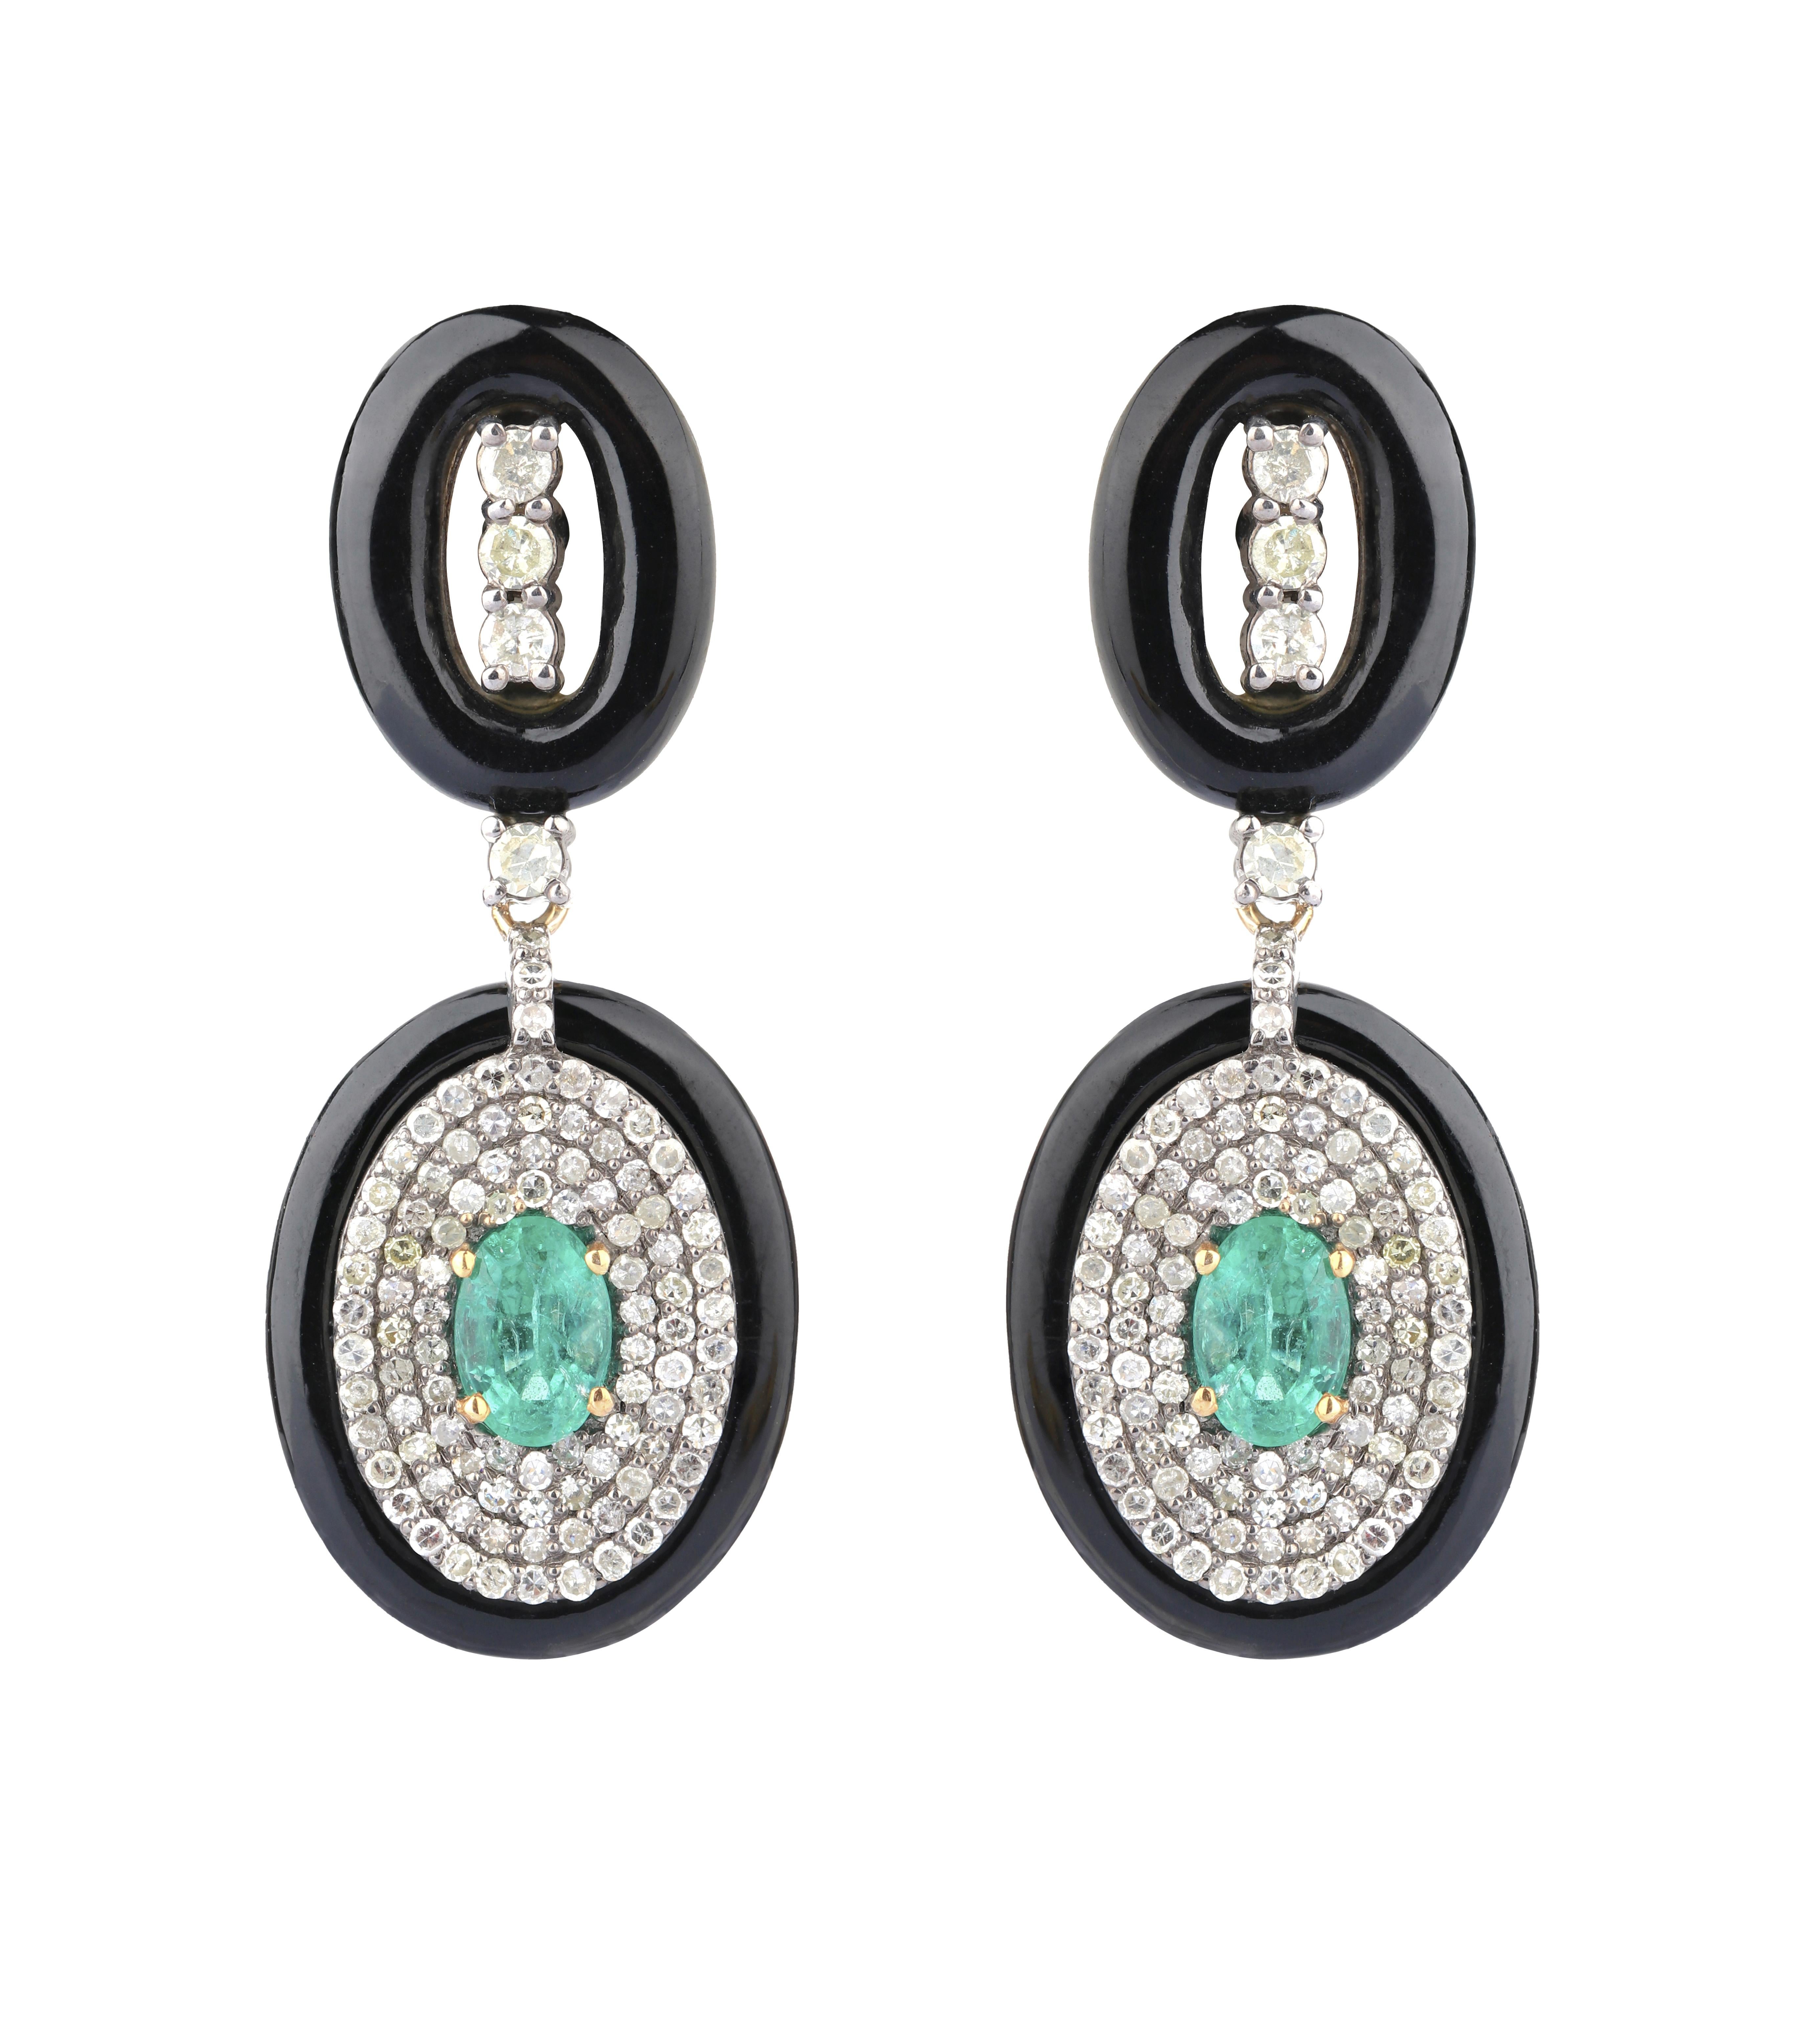 12.05 Carats Diamond, Emerald, and Black Onyx Drop Earrings in Art Deco Style For Sale 1